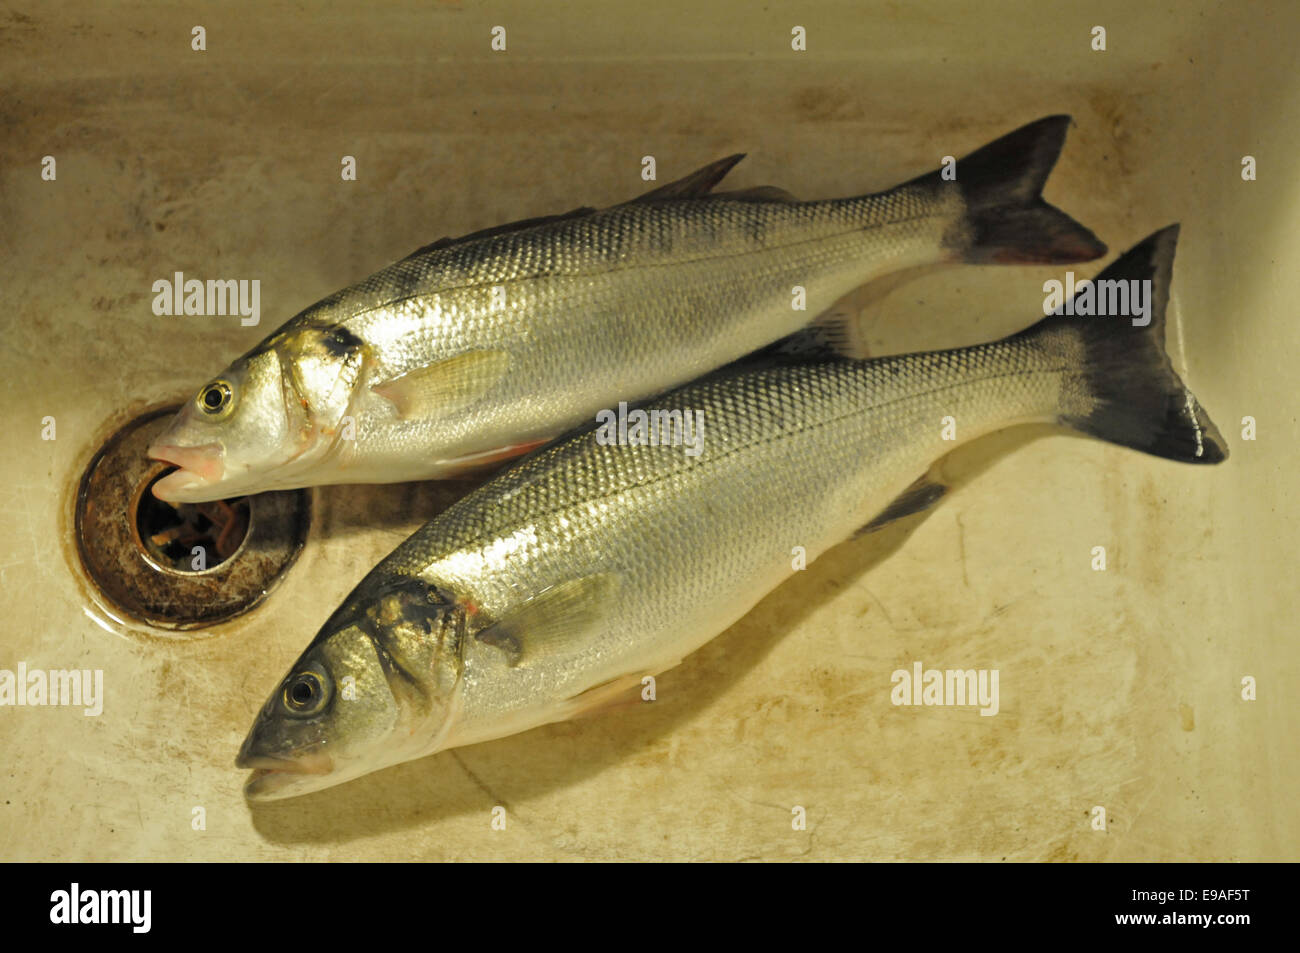 Two Sea Bass just caught in the waters of Falmouth, UK Stock Photo